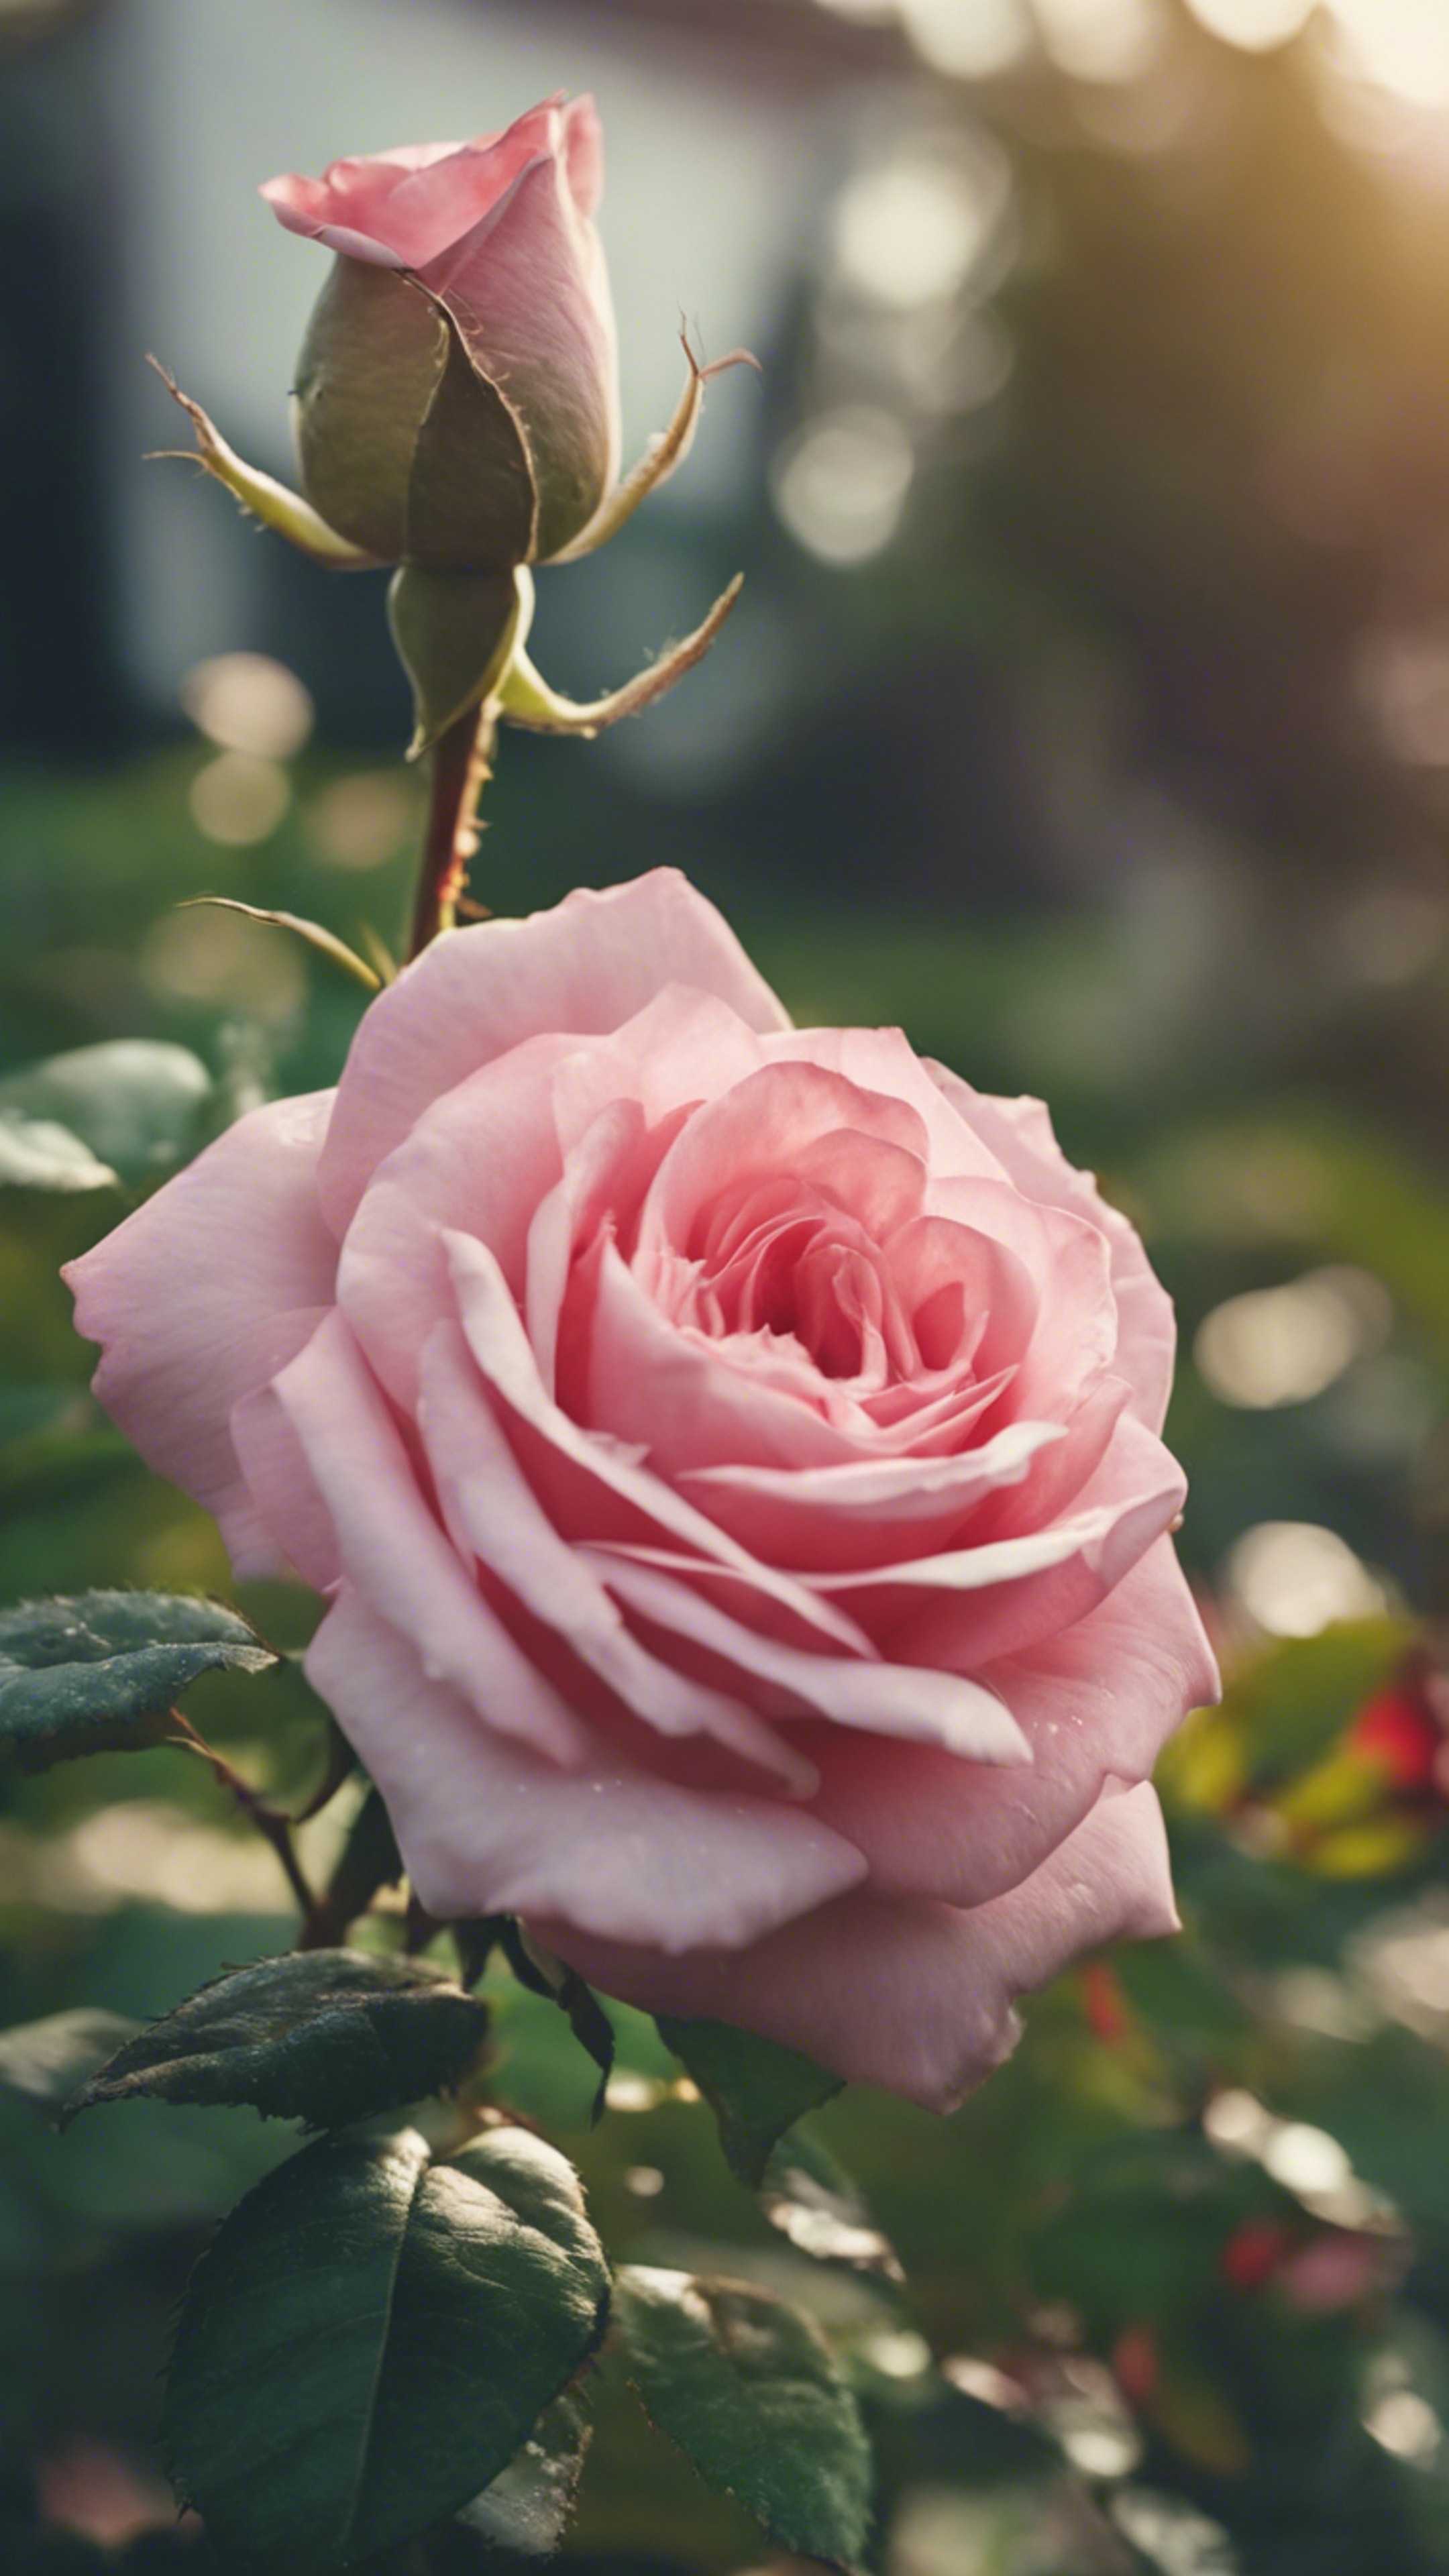 A beautiful pink heart-shaped rose blooming in a lush green garden. Tapeta[602cae484ee541a8ab0b]